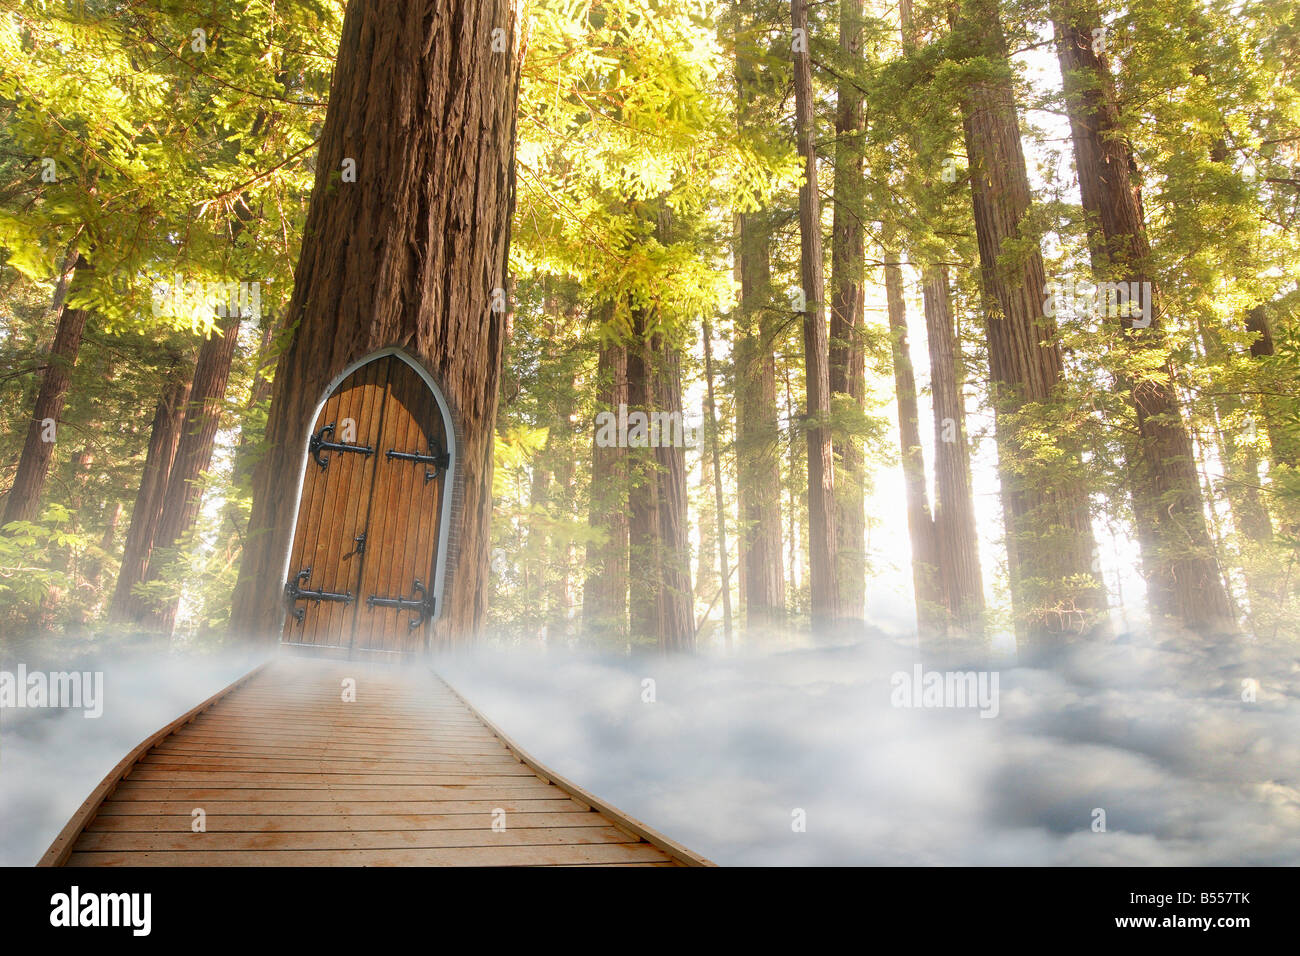 Surreal landscape with clouds & door & trees Stock Photo